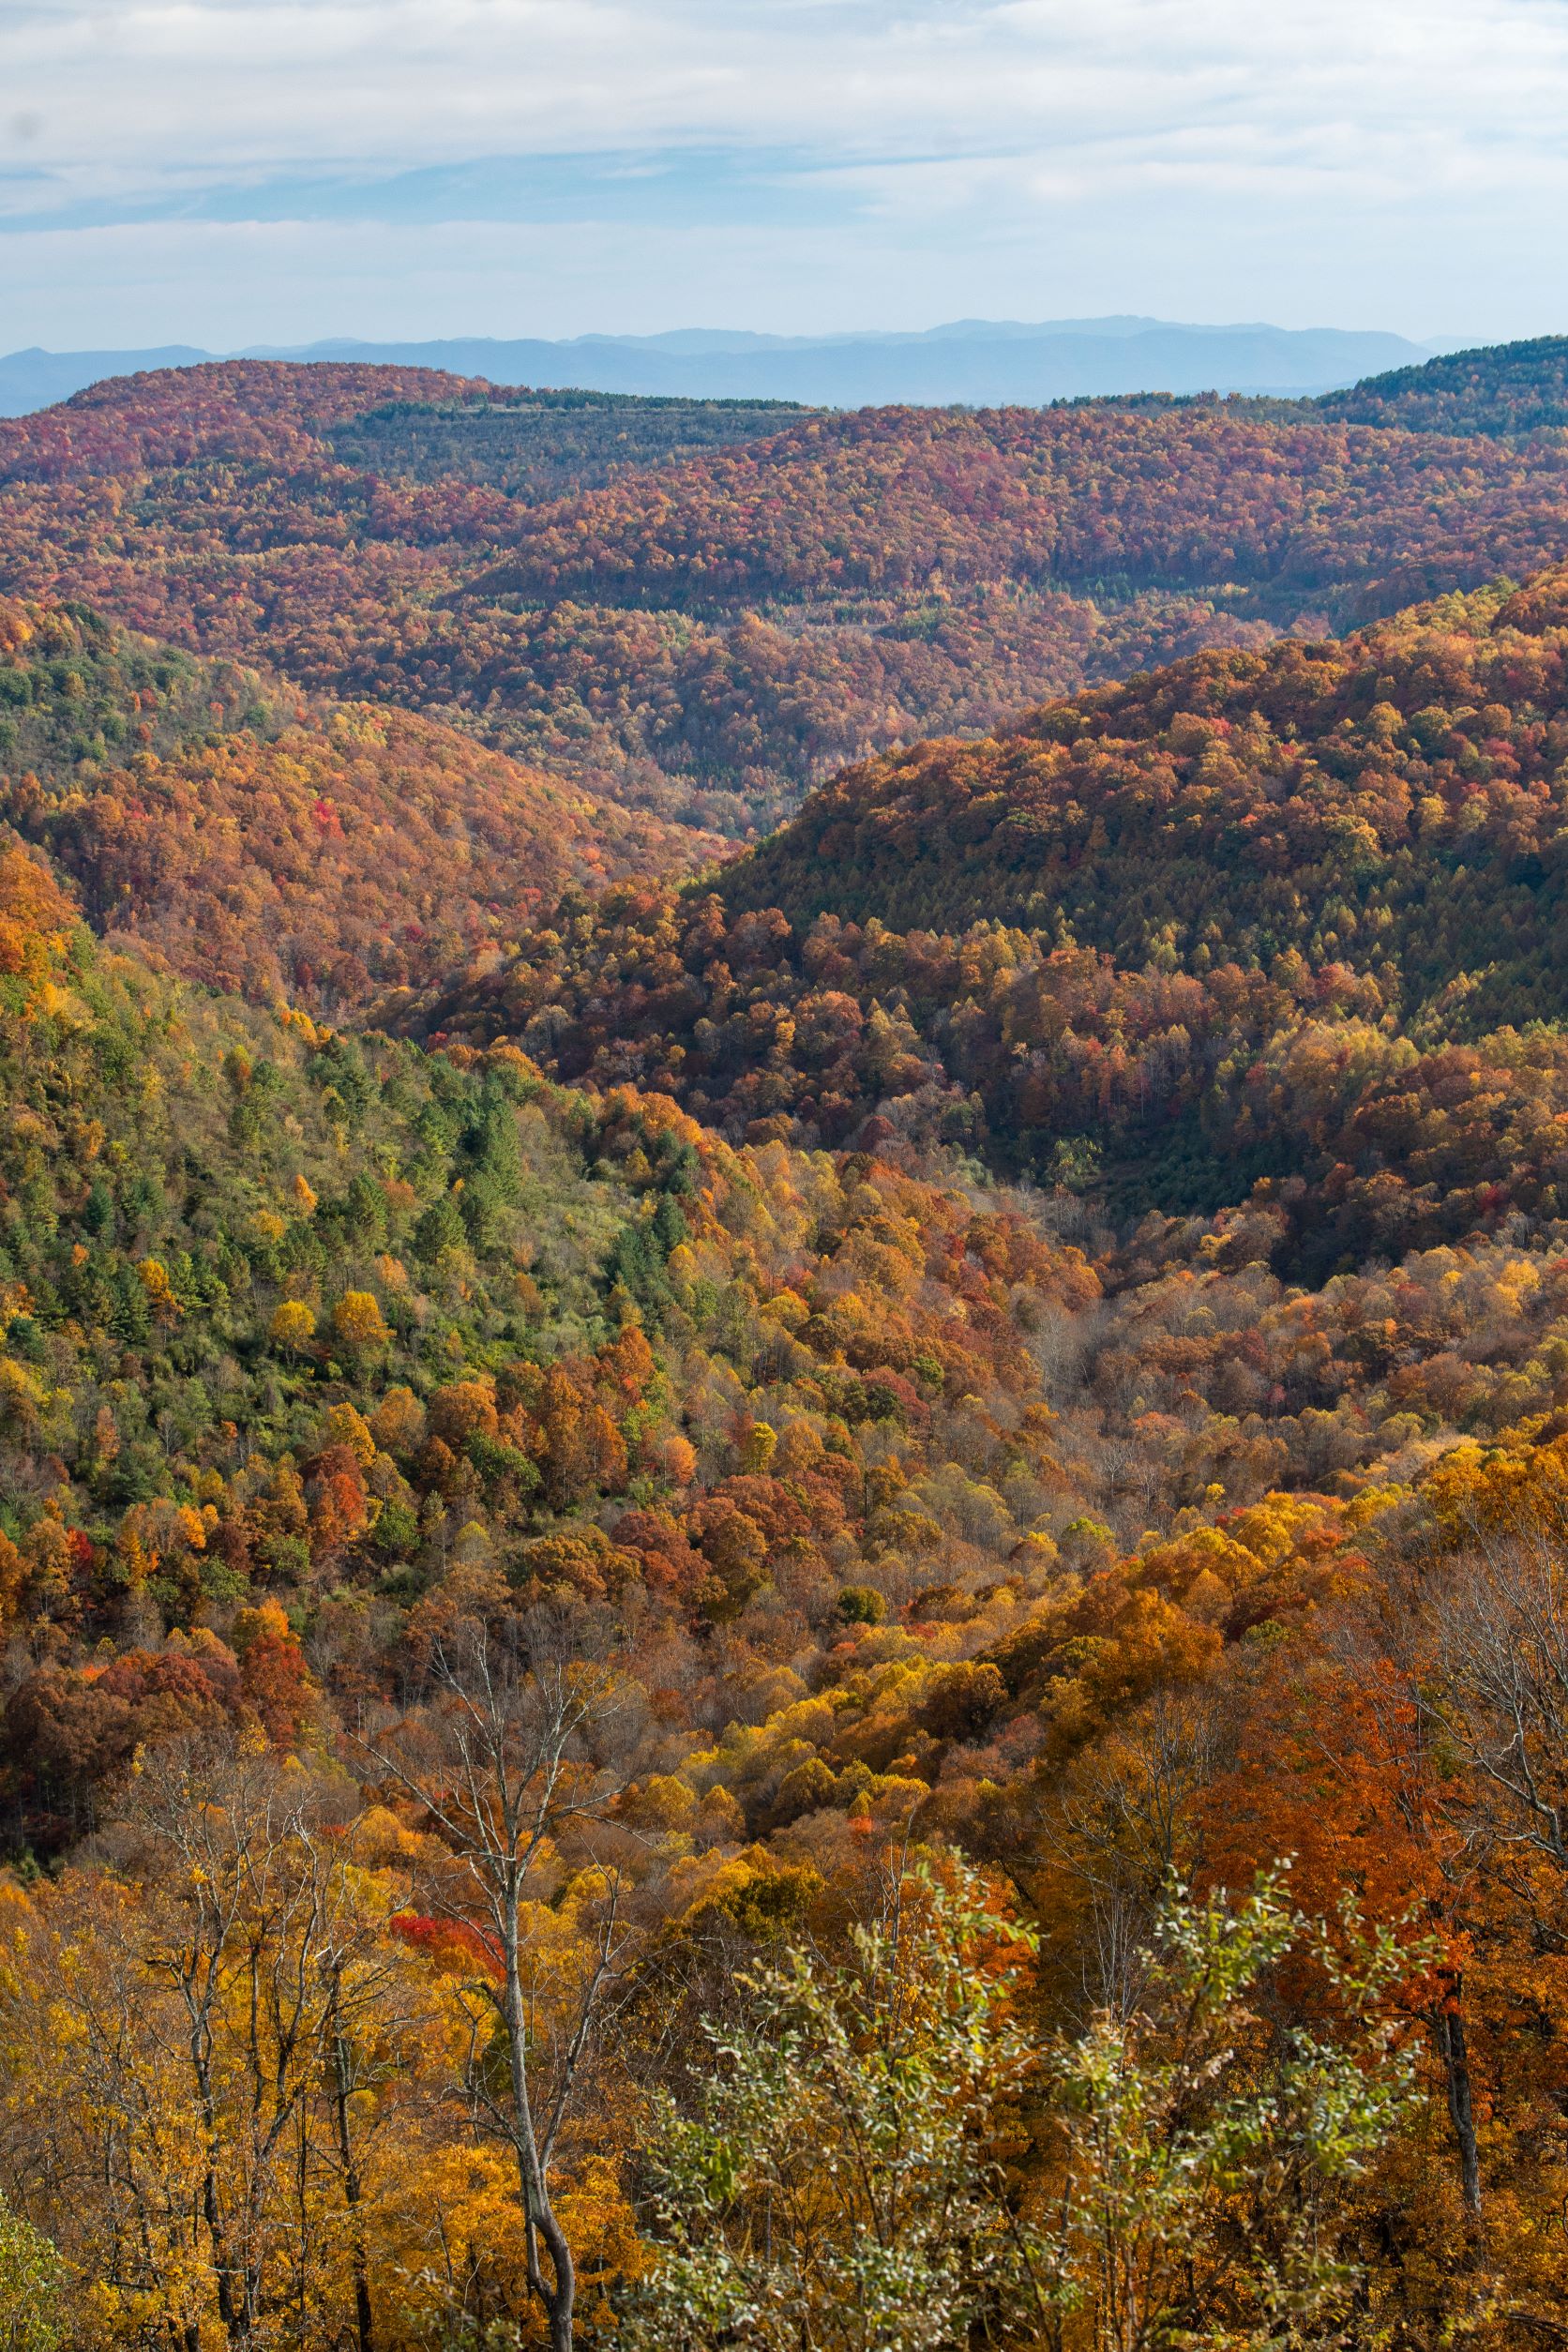 A range of mountains in fall colors.